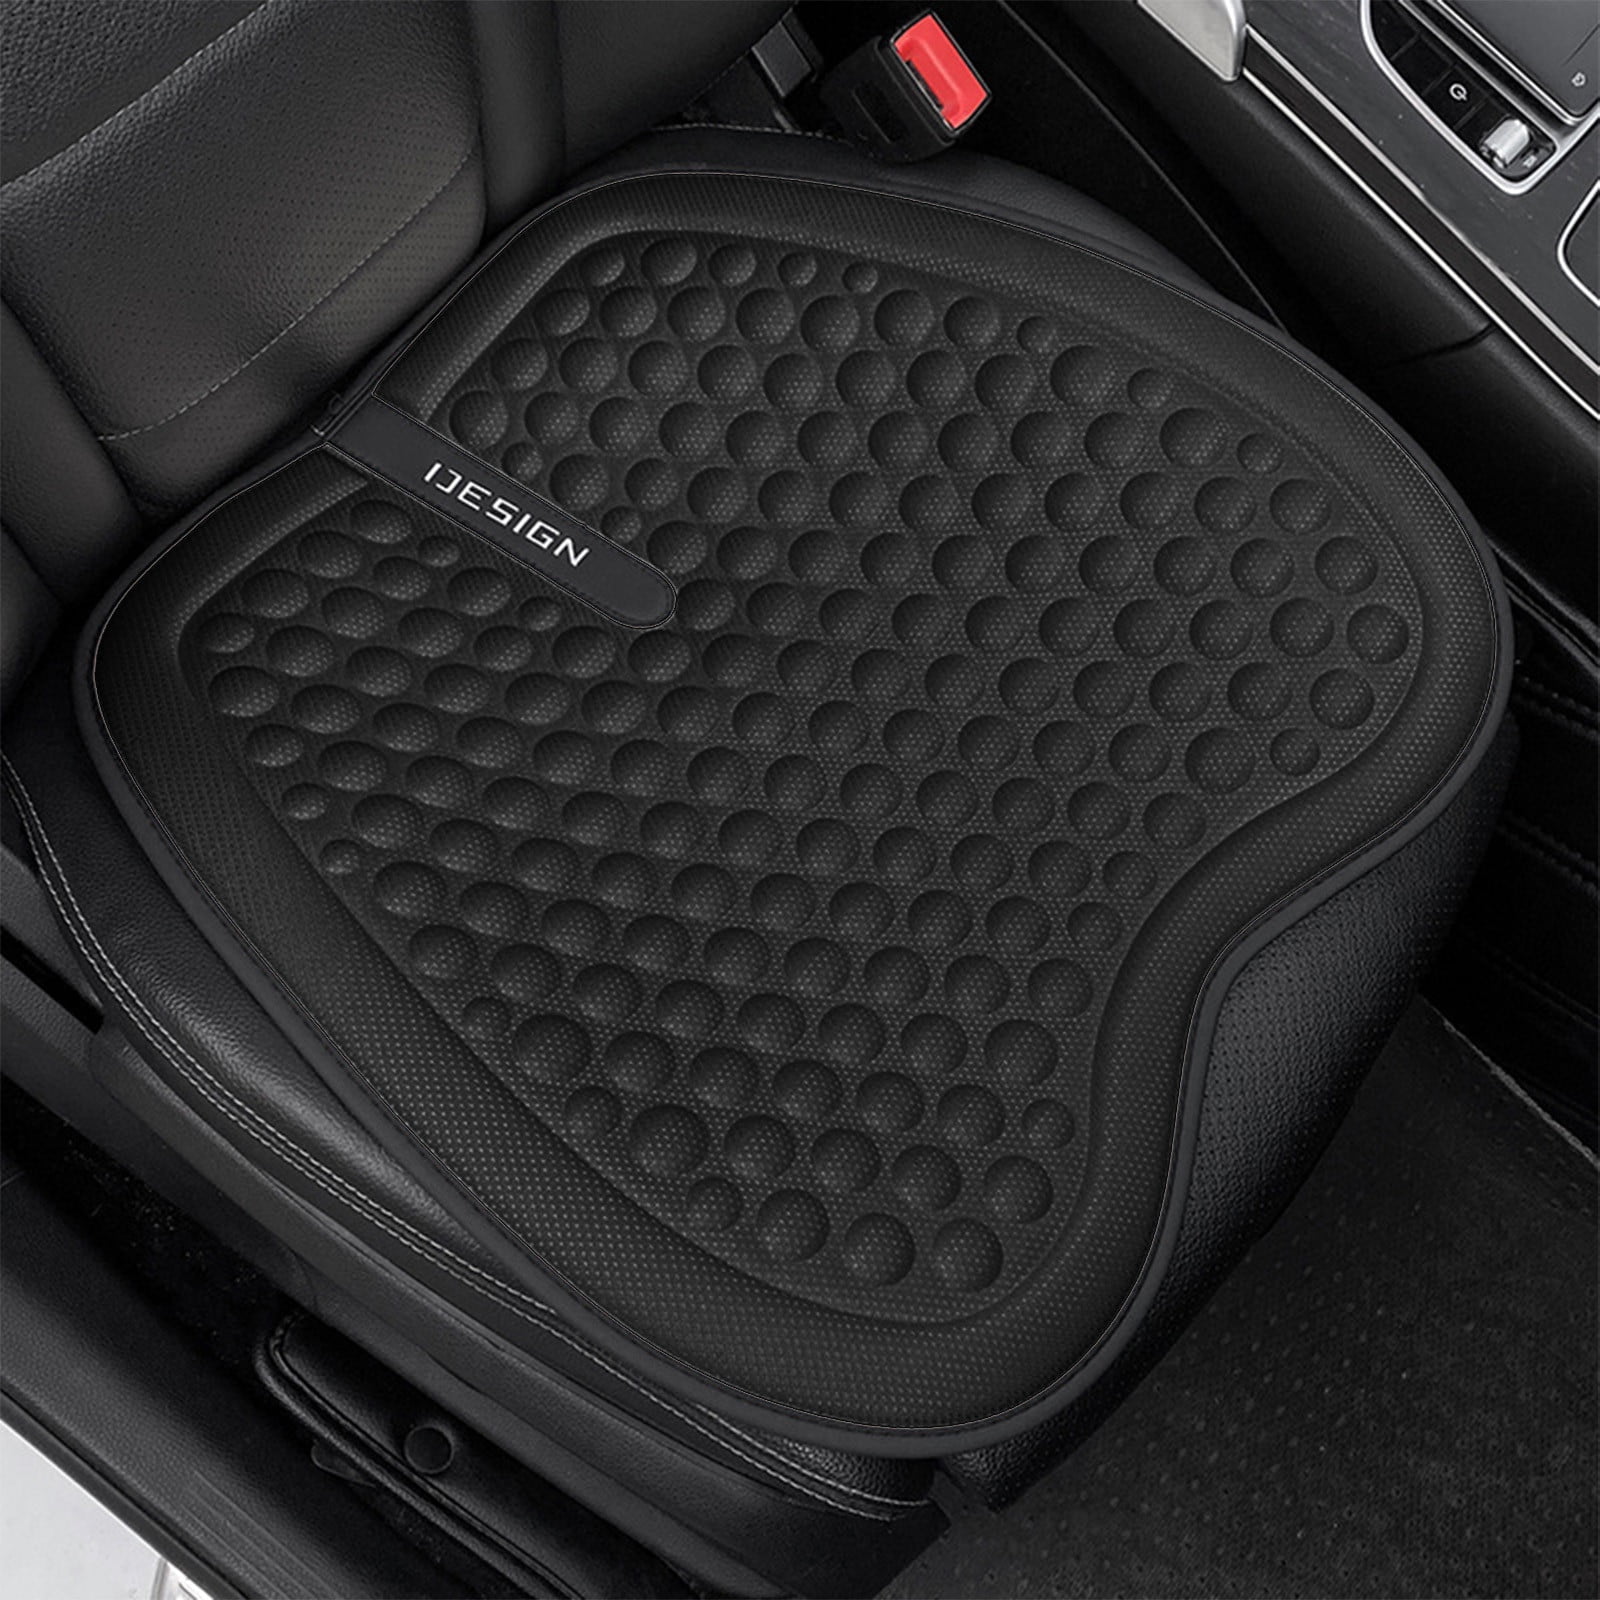 Cooling Seat Cushion with Kool Max® Packs